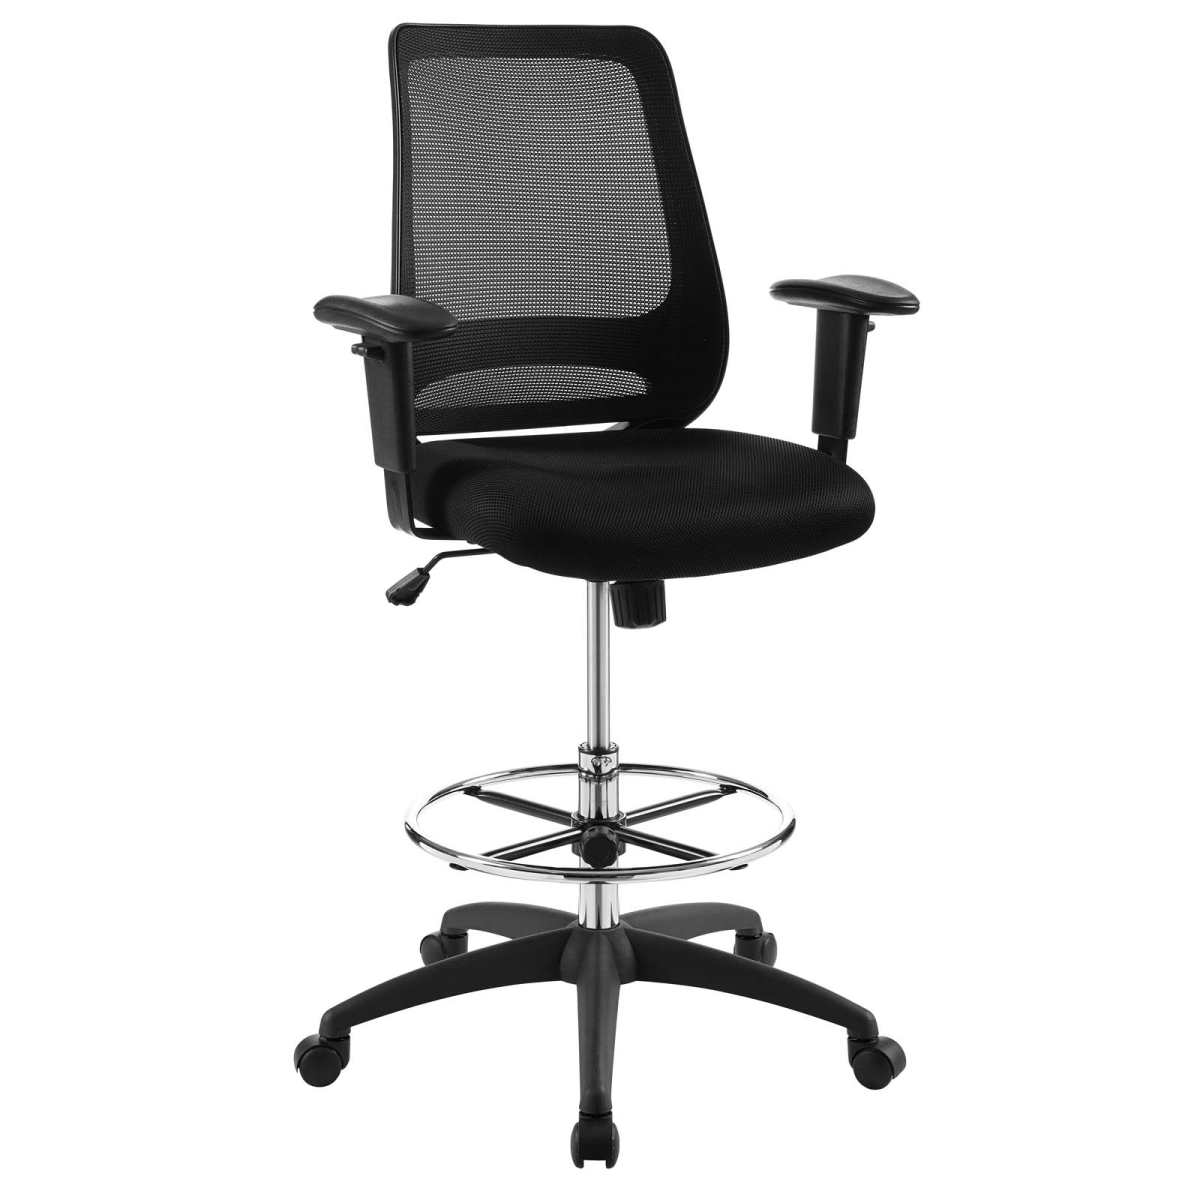 Eei-3196-blk Forge Mesh Drafting Chair - Black, 49 X 28.5 X 25 In.